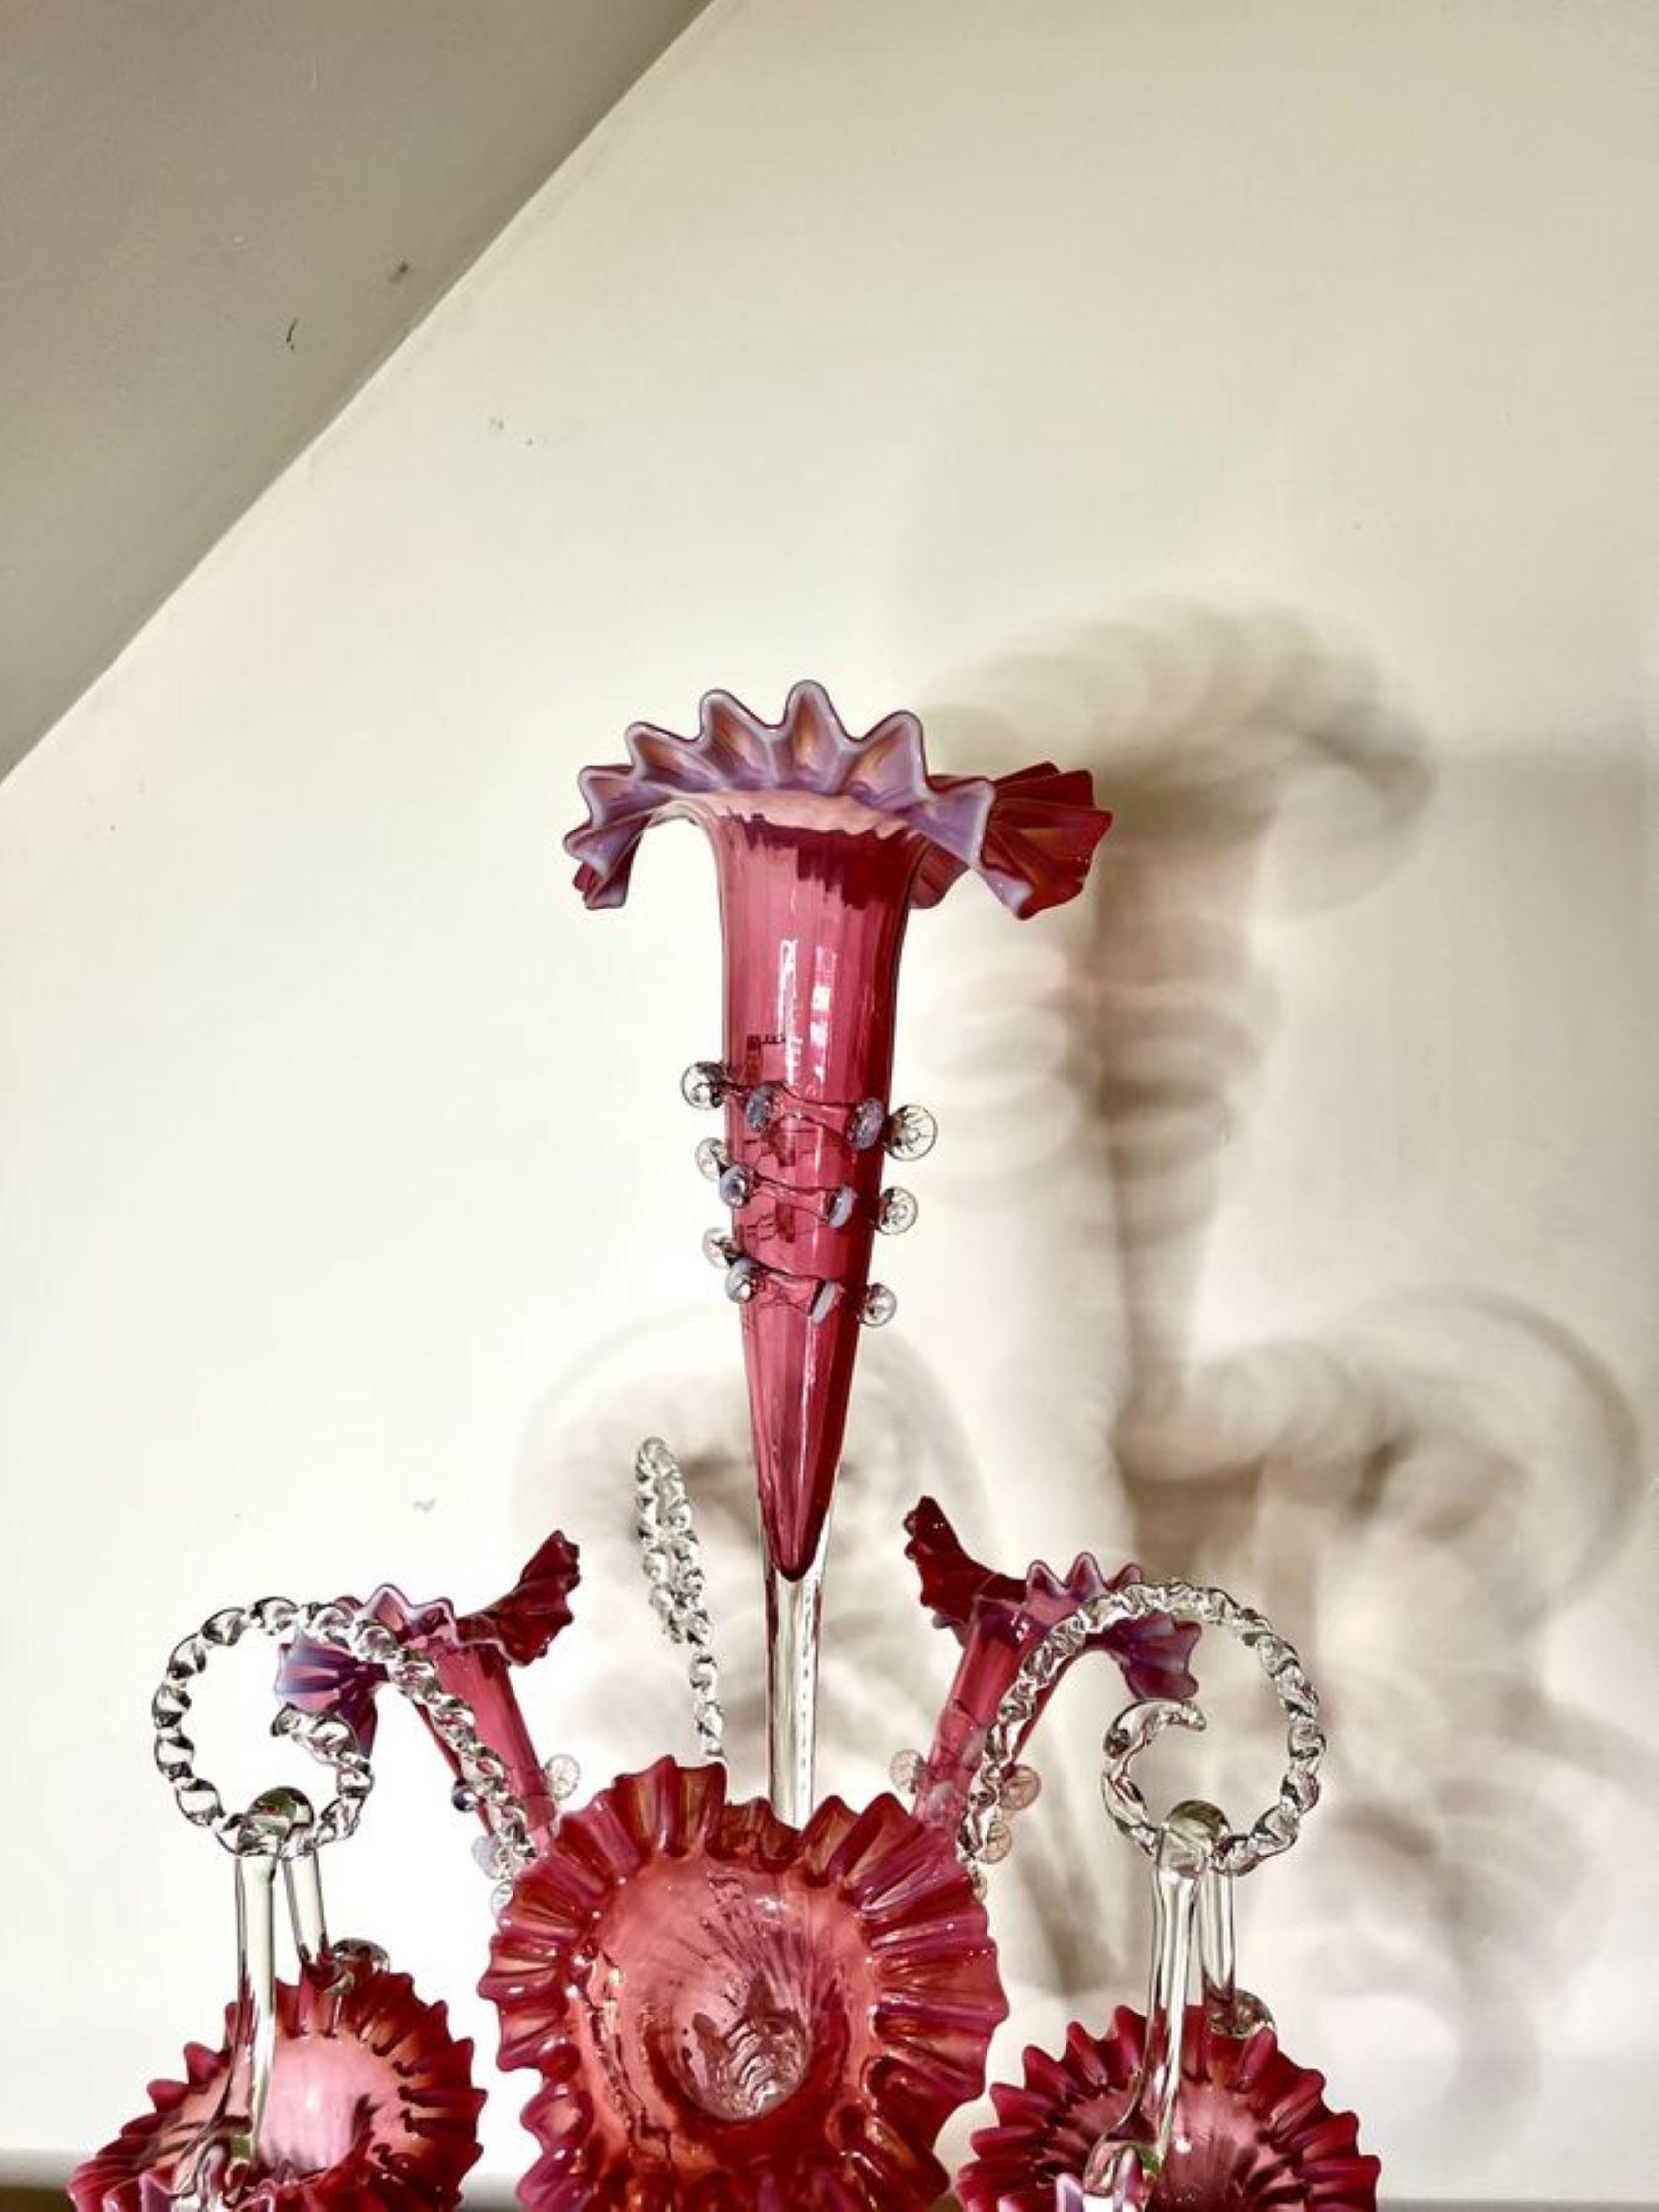 Outstanding quality large antique Victorian cranberry glass epergne 1